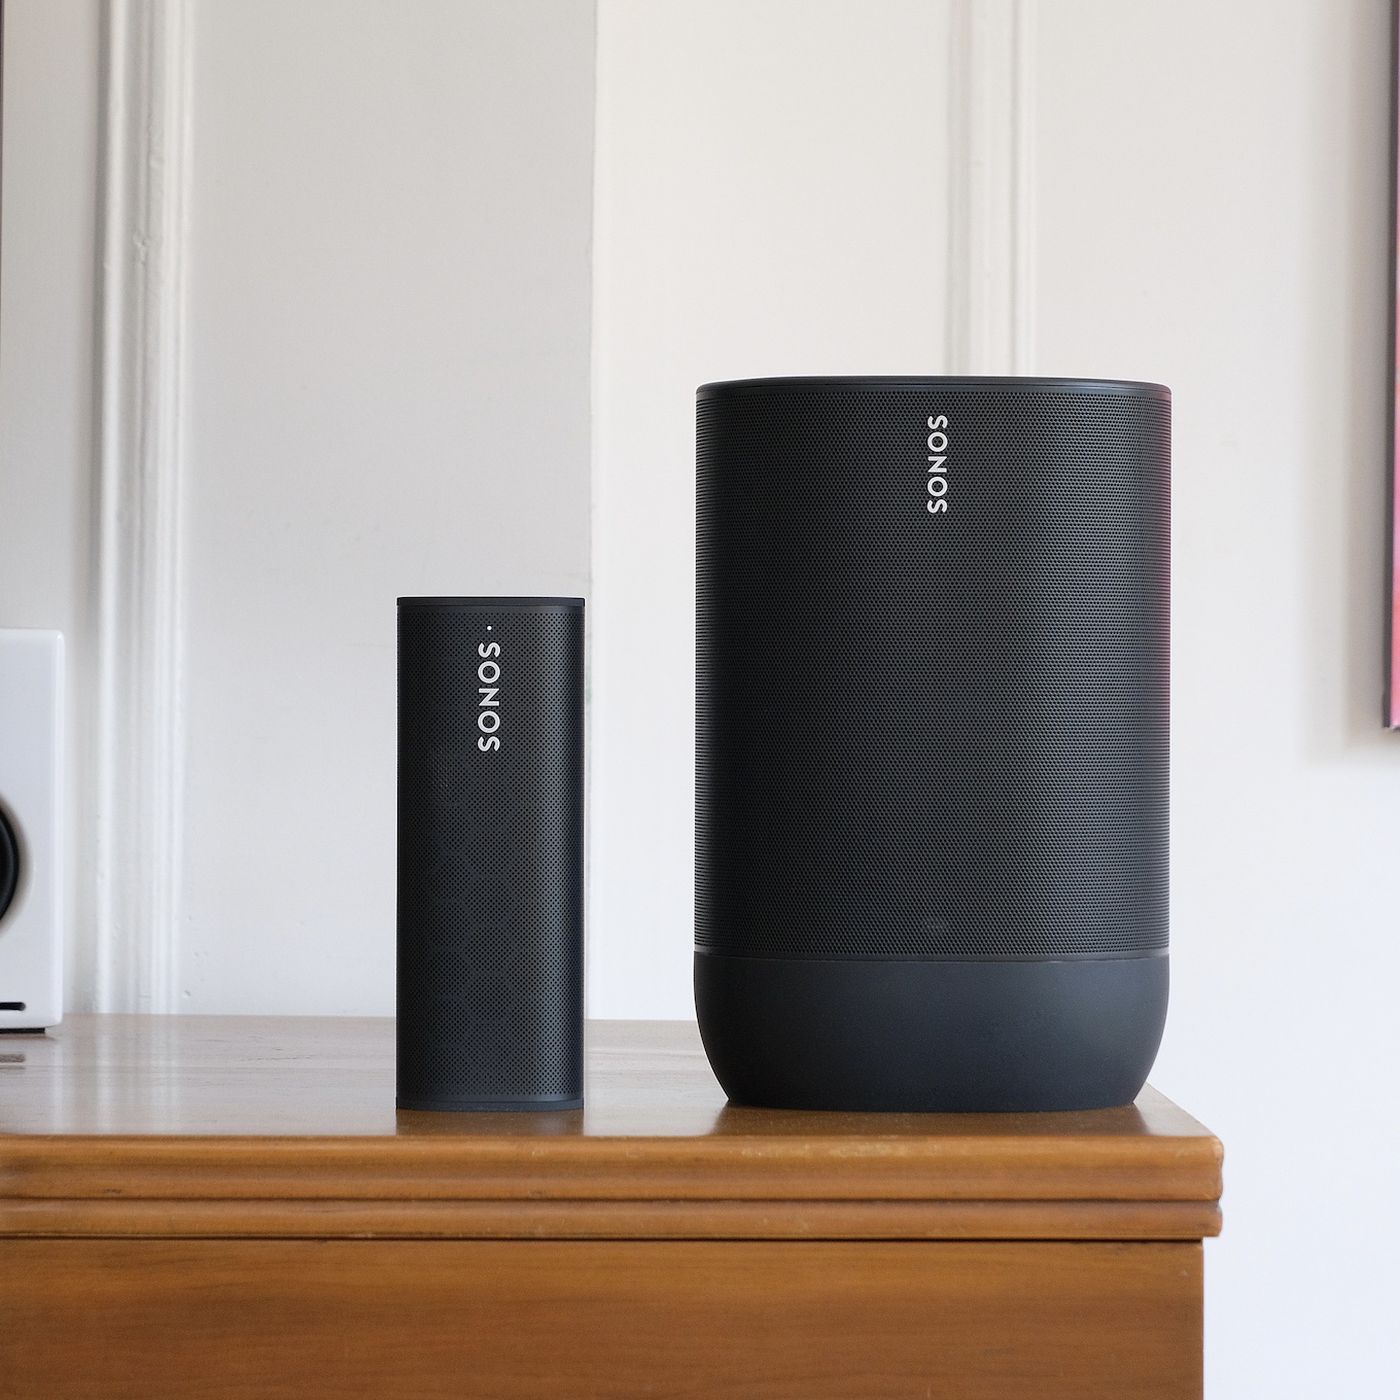 jeg er glad Gym operatør The best Sonos speakers to buy right now - The Verge